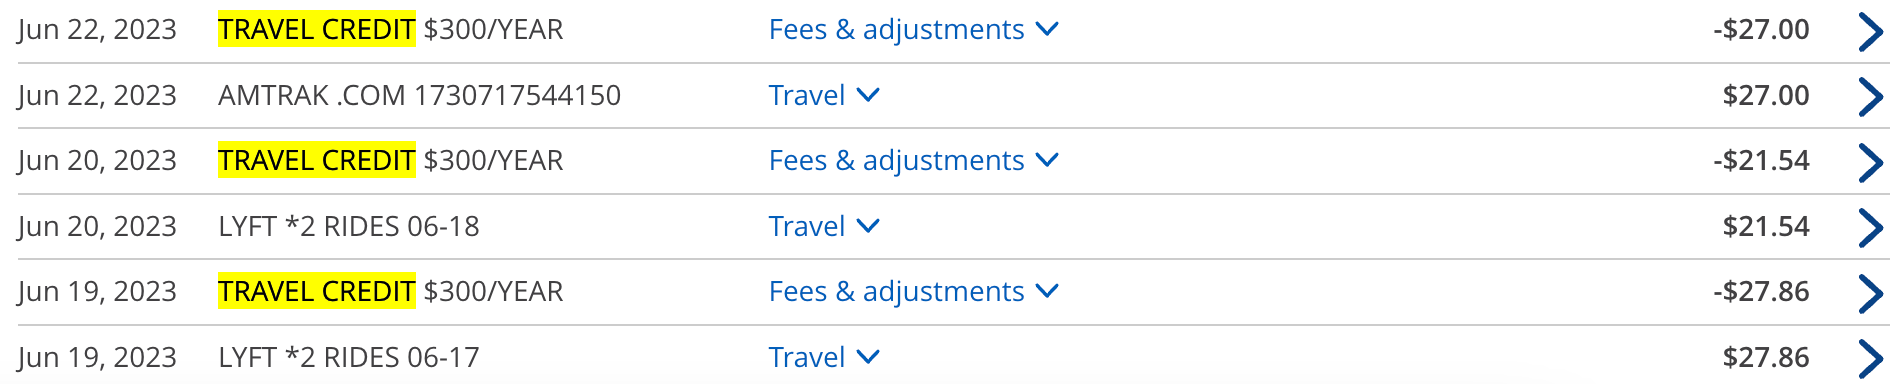 airbnb travel credit not appearing